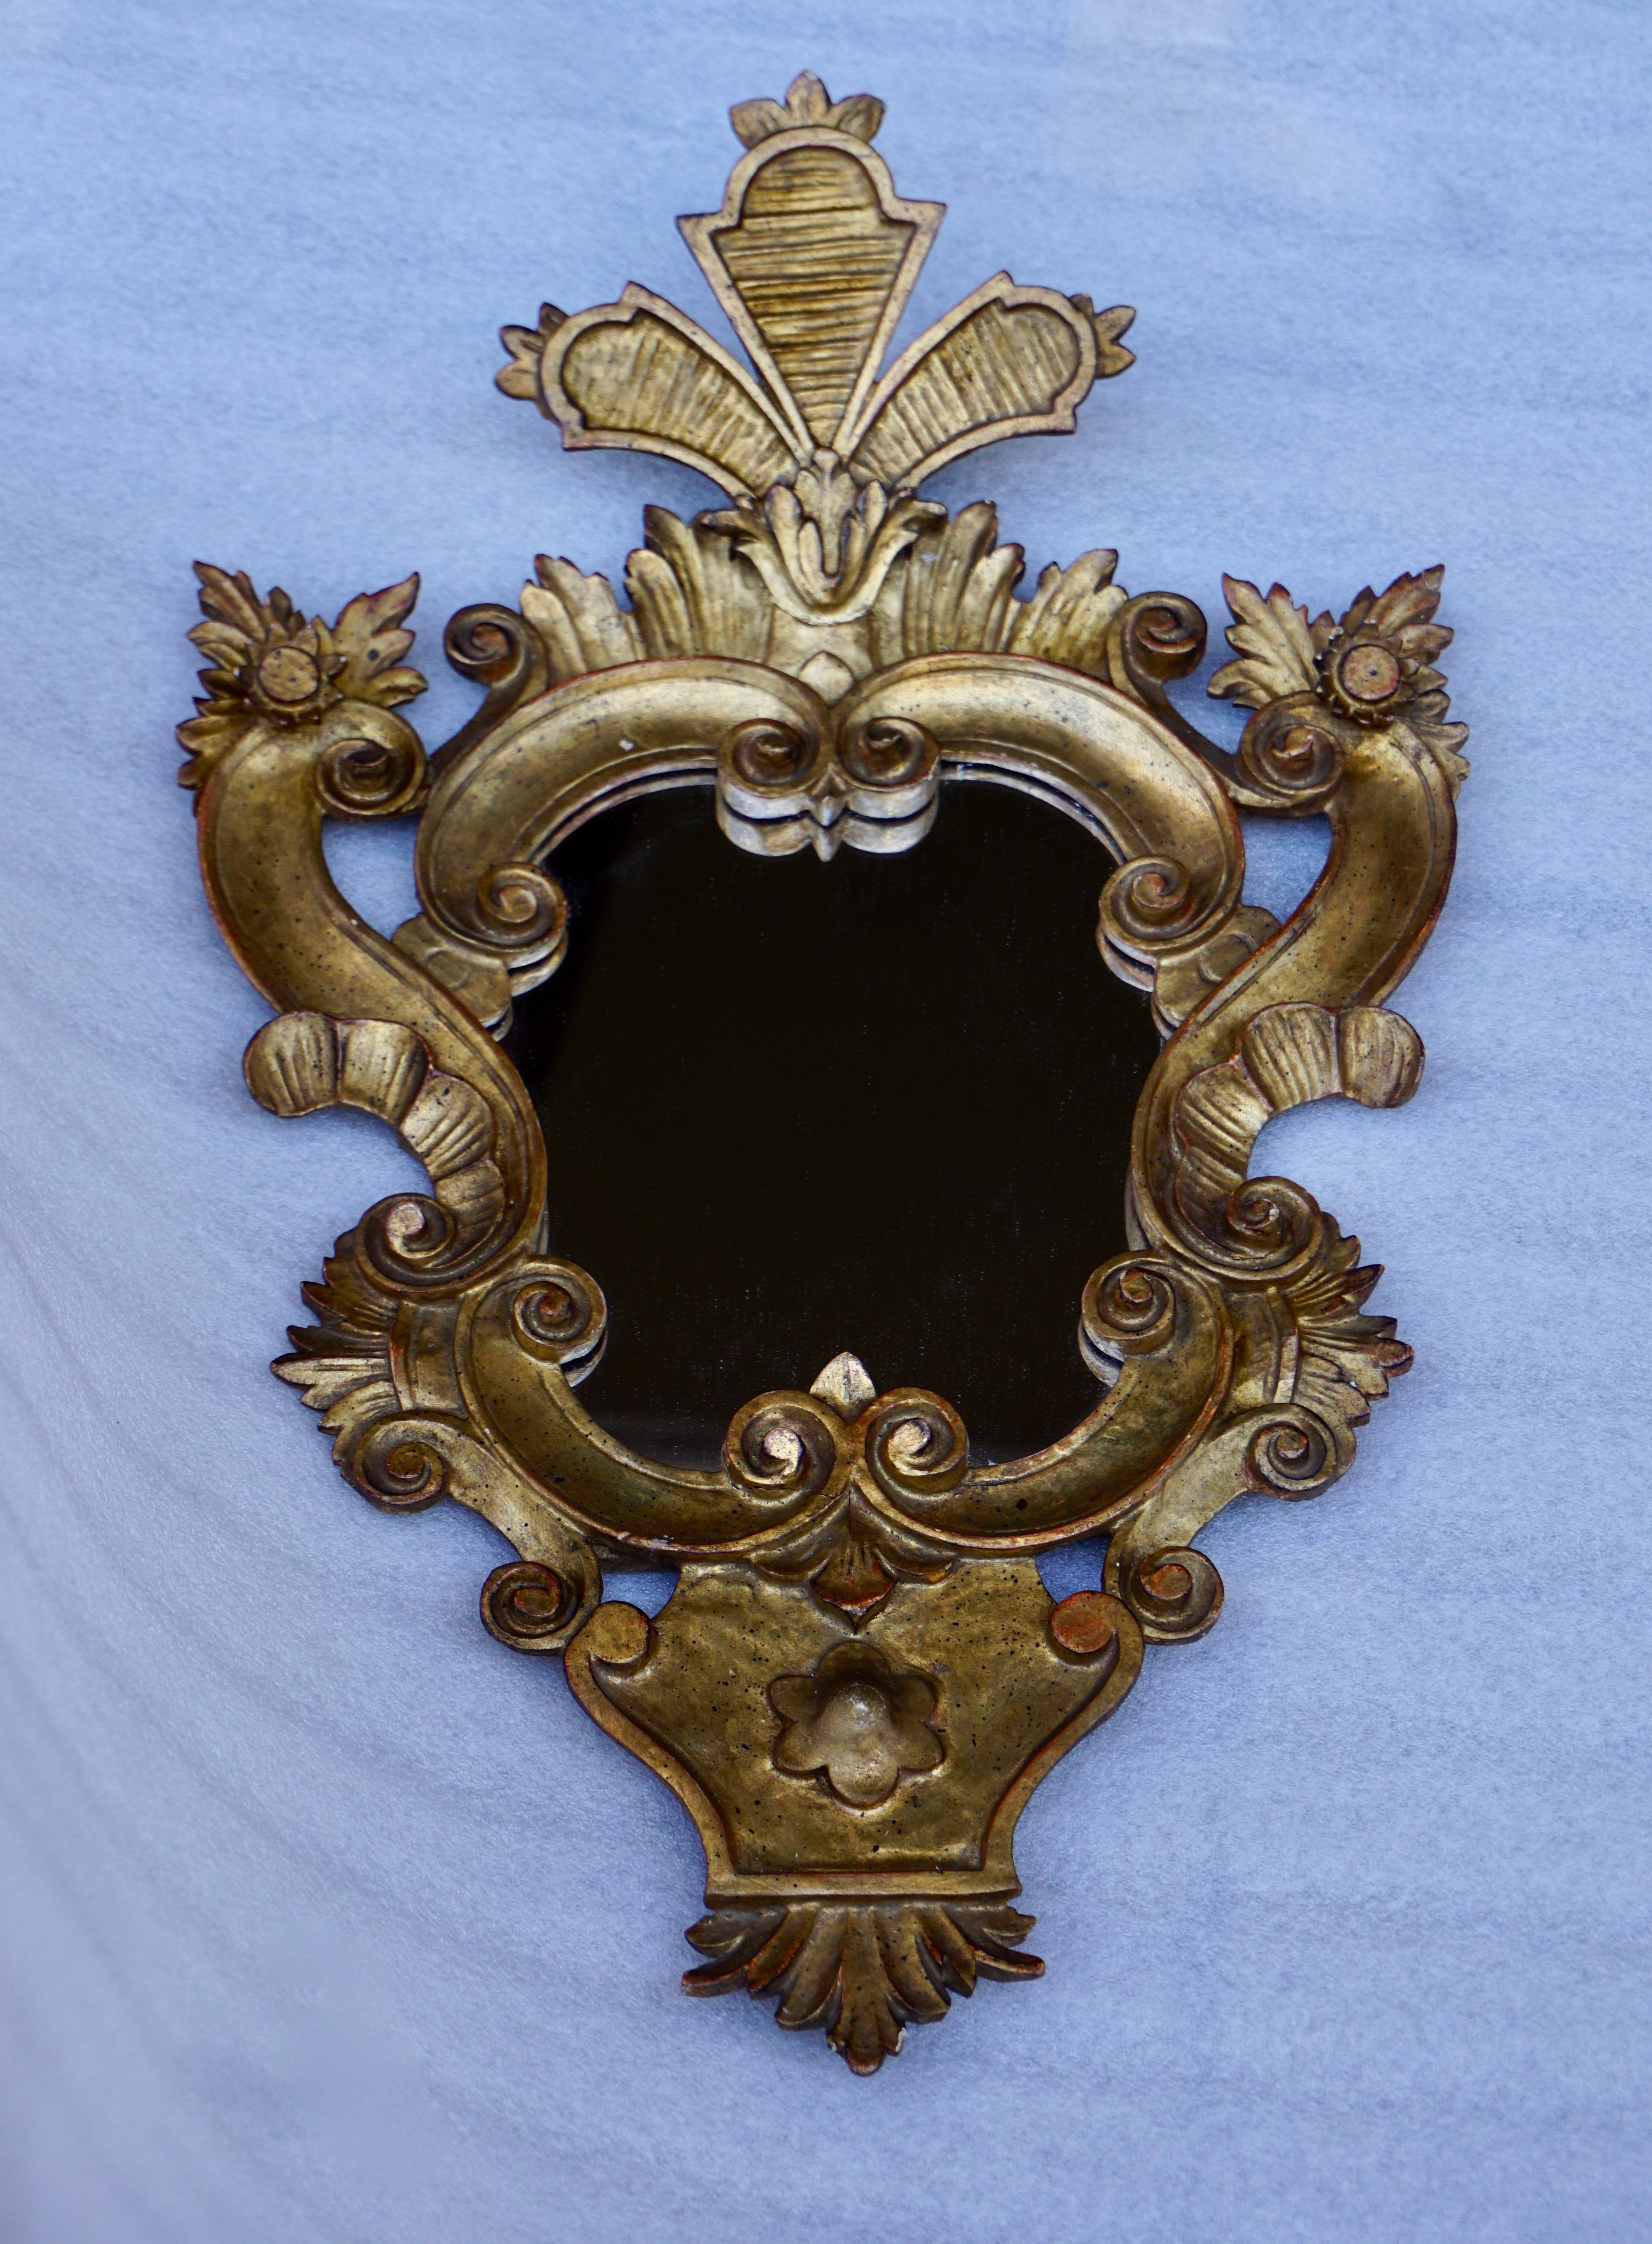 Beautiful Large Venetian Rococo style carved gilt wood mirror.
Measures: Height 60 cm.
Width 38 cm.
Depth 10 cm.